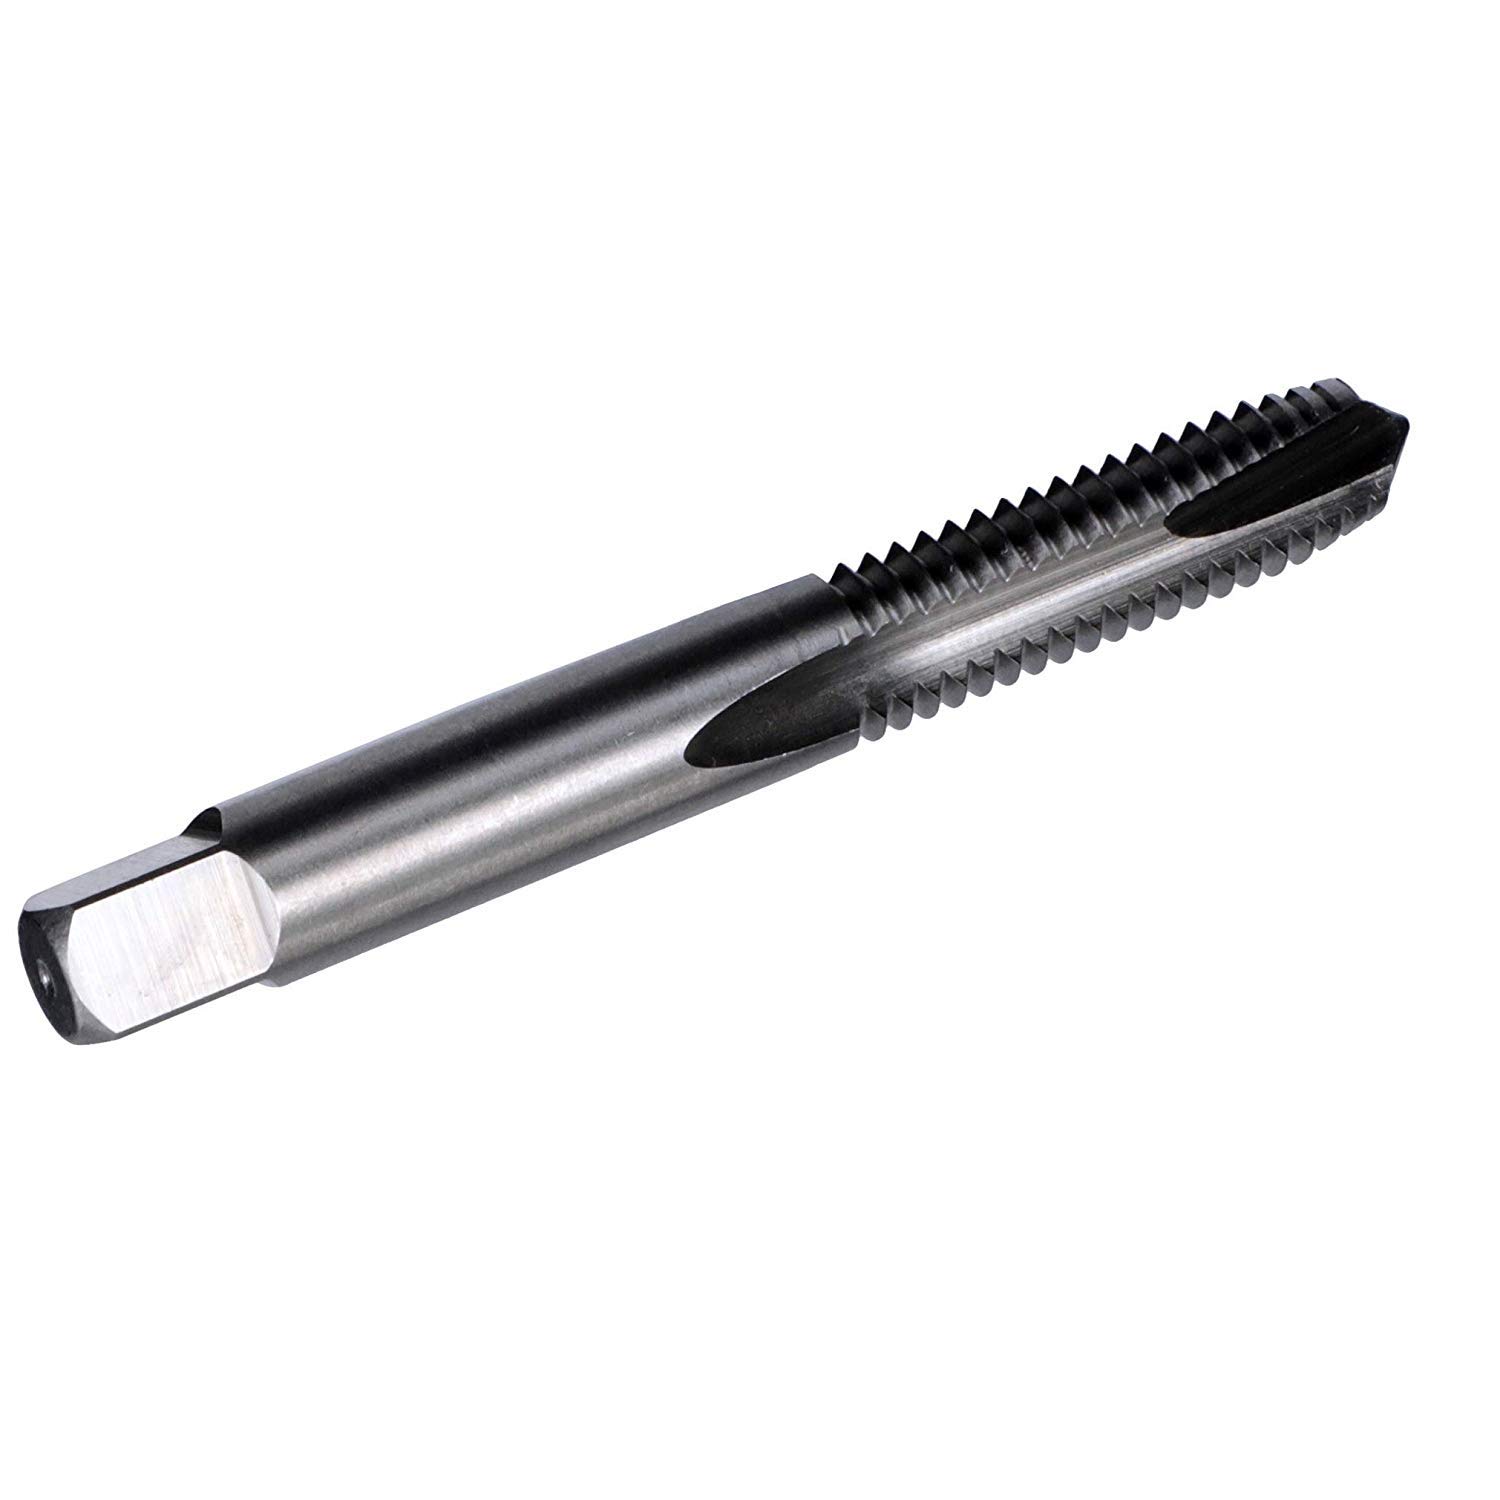 Drill America 3-56 High Speed Steel 2 Flute Spiral Point Tap Pack of 12 DWT Series並行輸入品